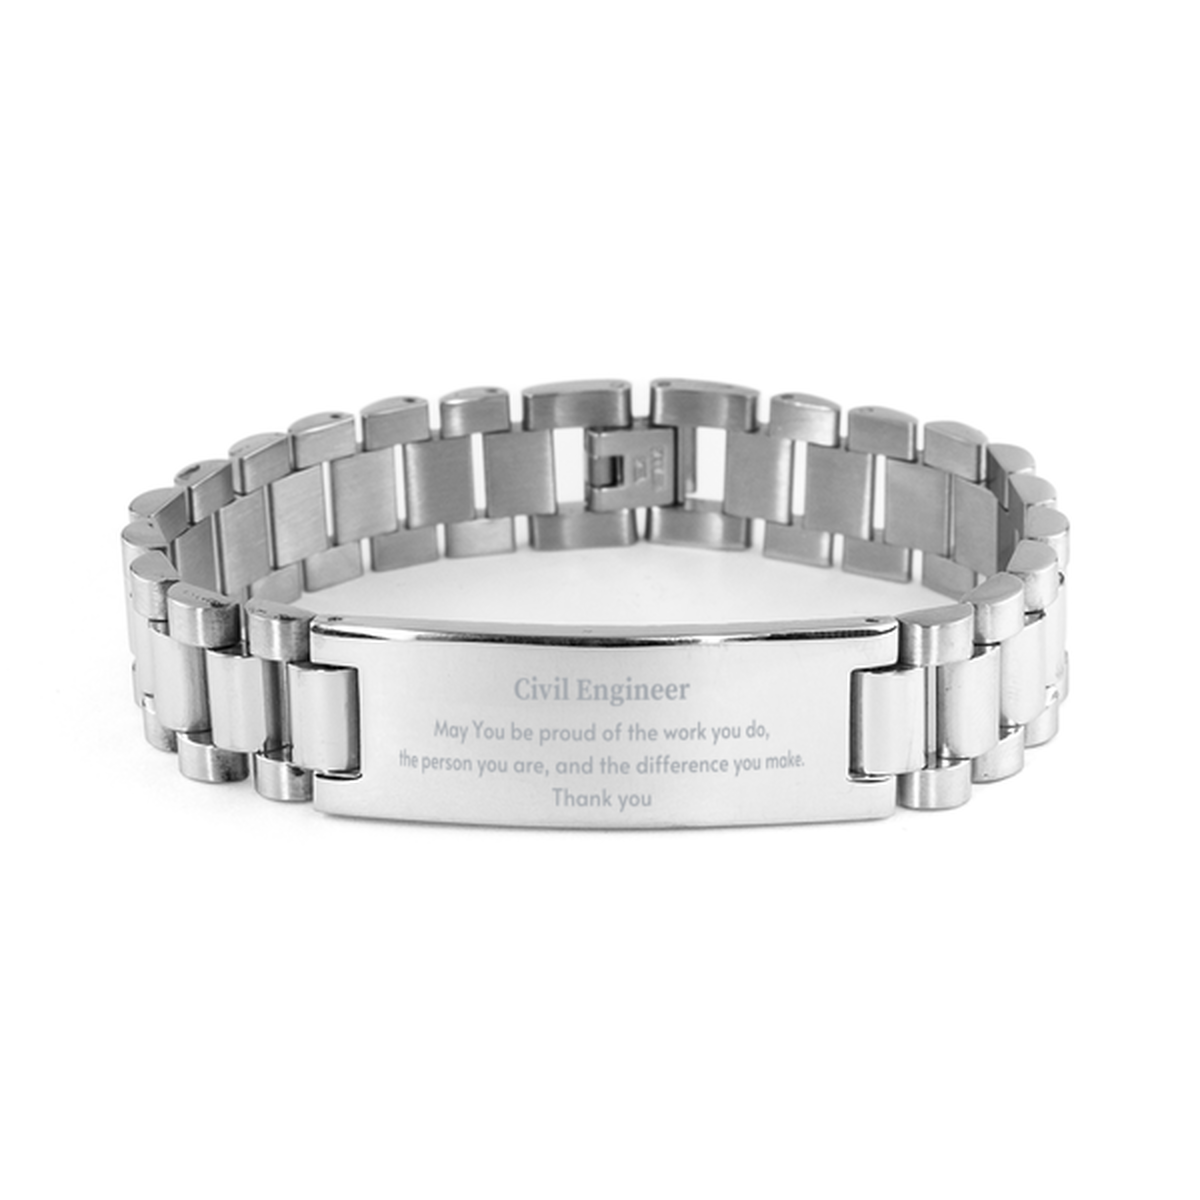 Heartwarming Ladder Stainless Steel Bracelet Retirement Coworkers Gifts for Civil Engineer, Civil Engineer May You be proud of the work you do, the person you are Gifts for Boss Men Women Friends